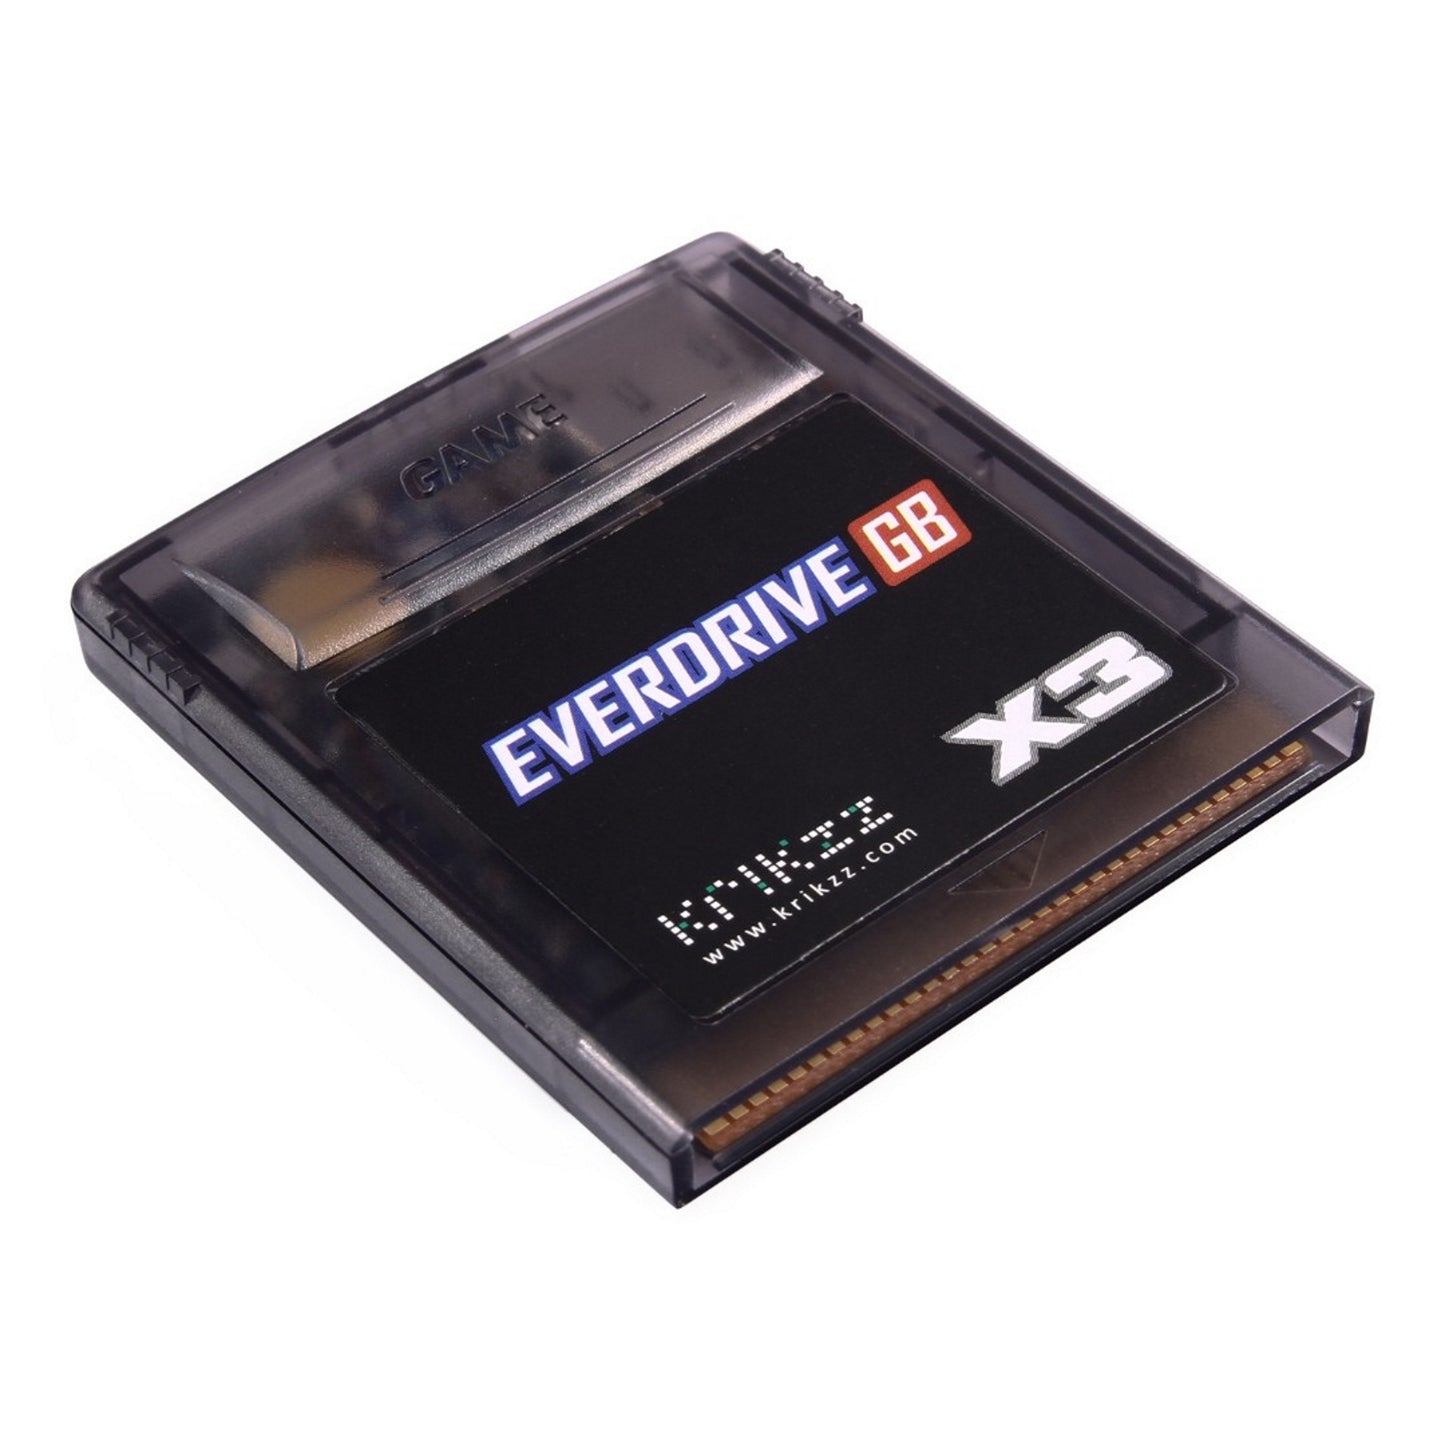 Everdrive GB X3 - Frosted Black